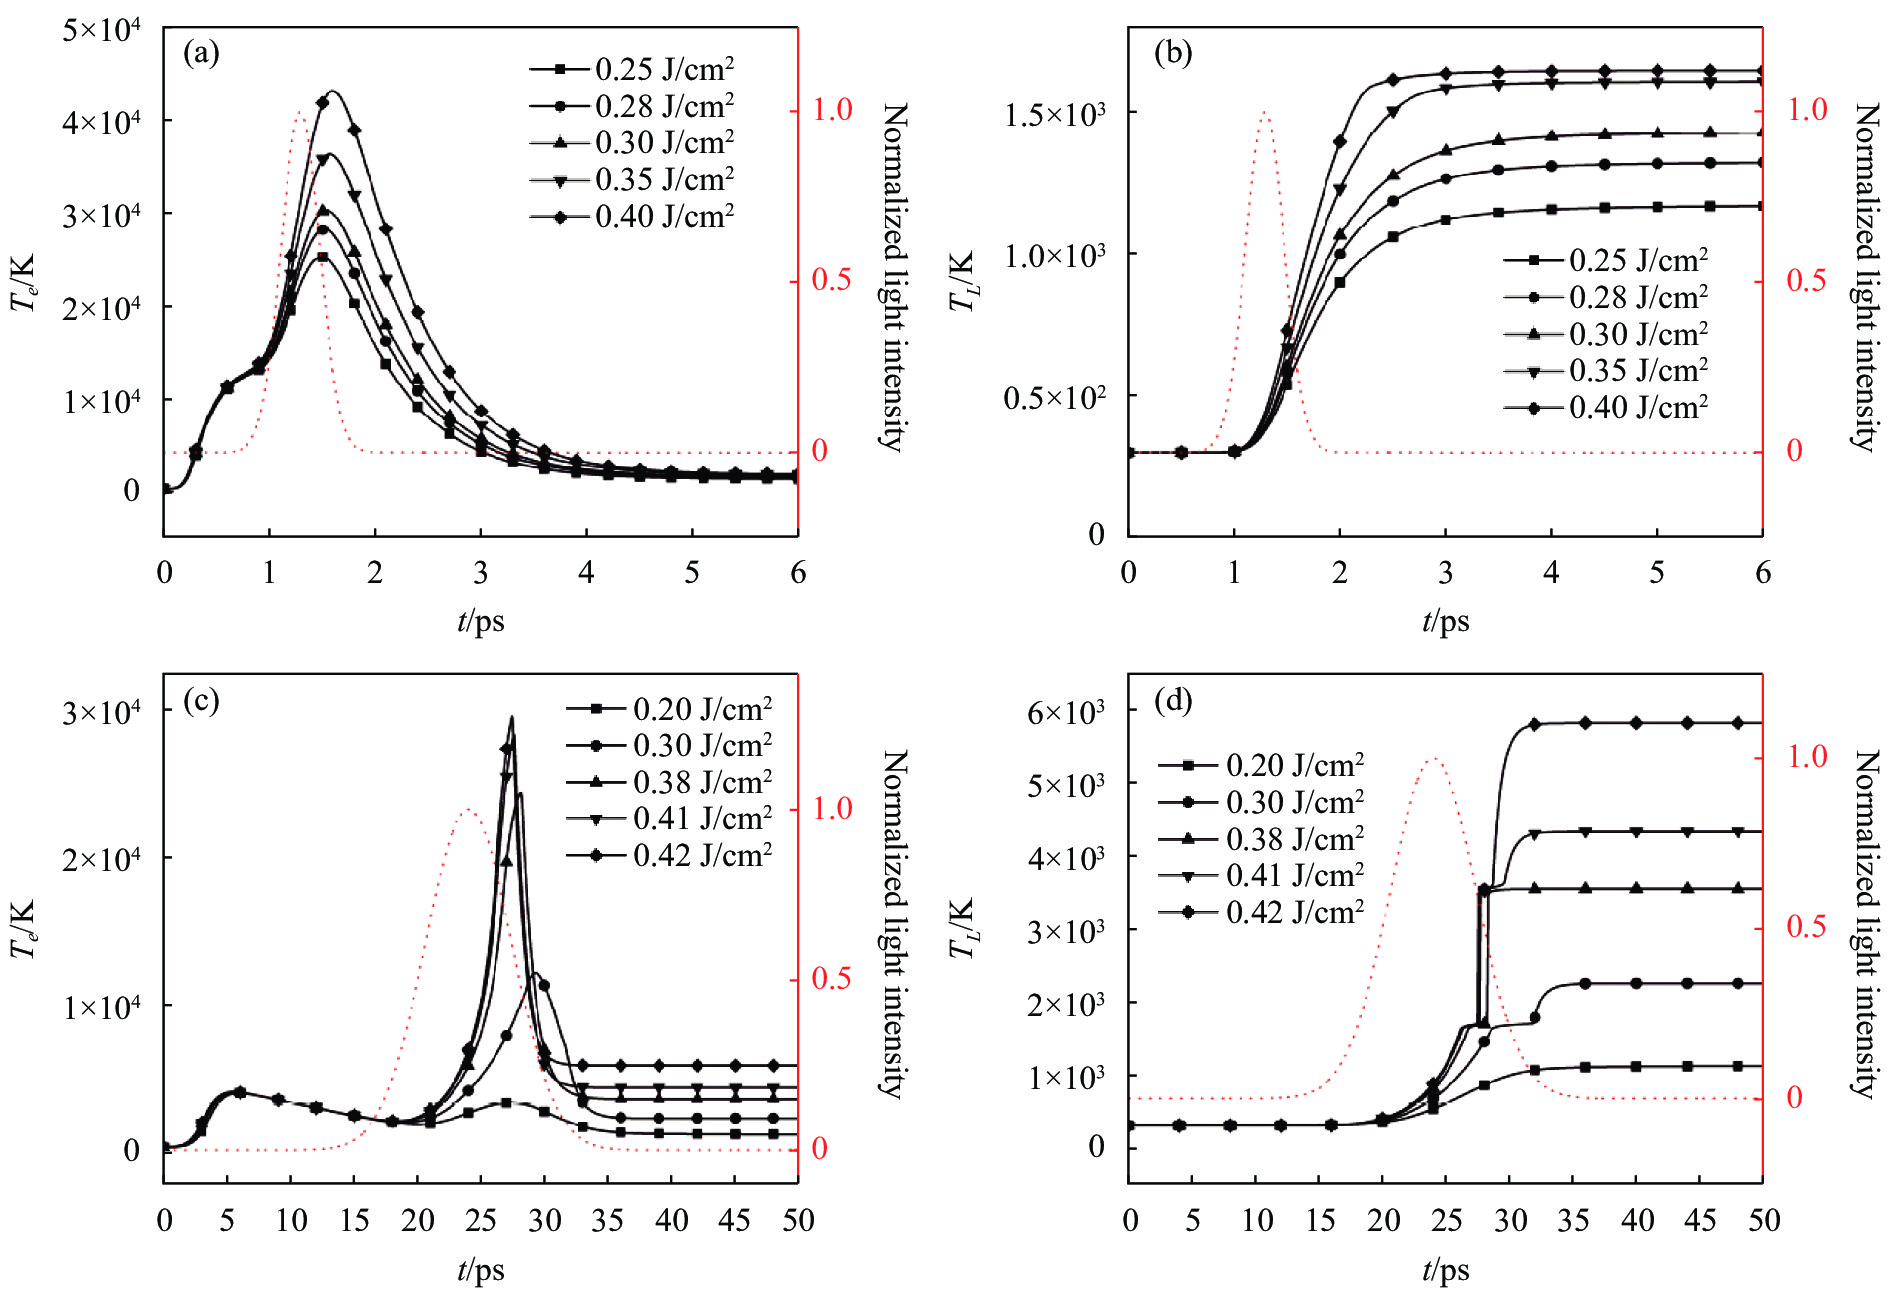 Variation of electron temperature with time (a) and lattice temperature with time (b) under subpicosecond laser irradiation with energy density of 0.25, 0.28, 0.30, 0.35, 0.40 J/cm2 and pulse width of 430 fs; Variation of electron temperature with time (c) and lattice temperature with time (d) under picosecond laser irradiation with energy density of 0.20, 0.30, 0.38, 0.41, 0.42 J/cm2 of 8 ps